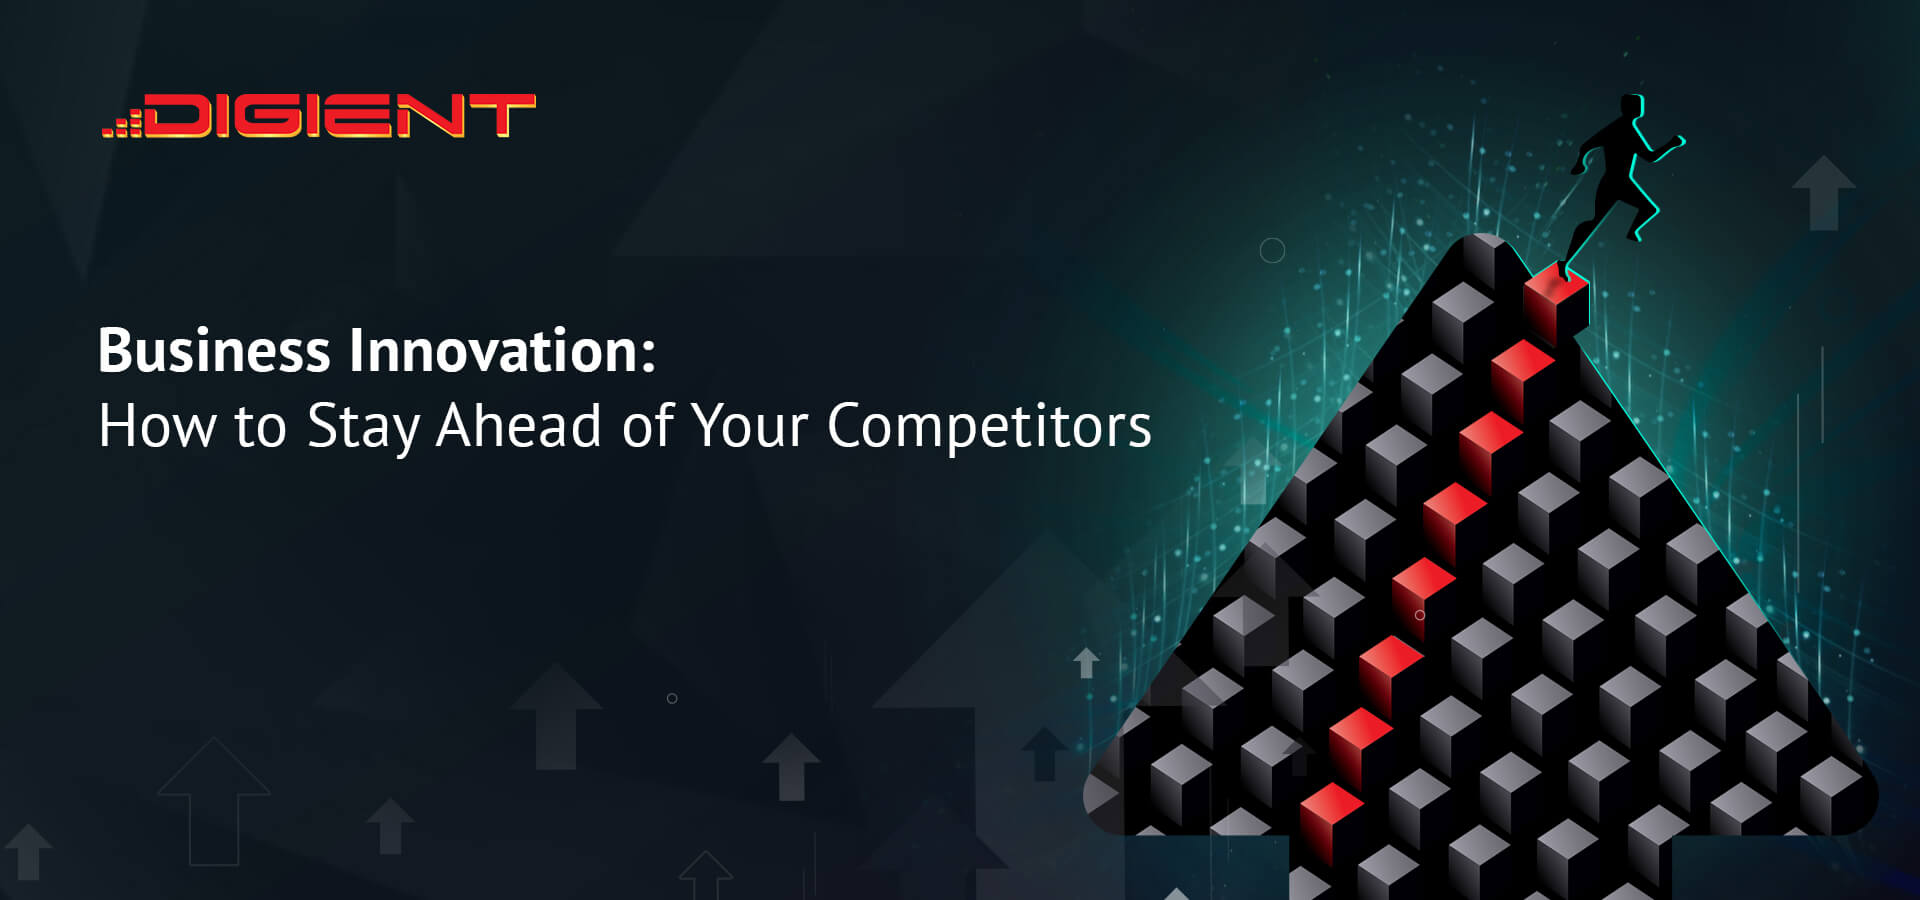 Business Innovation: How to Stay Ahead of Your Competitors